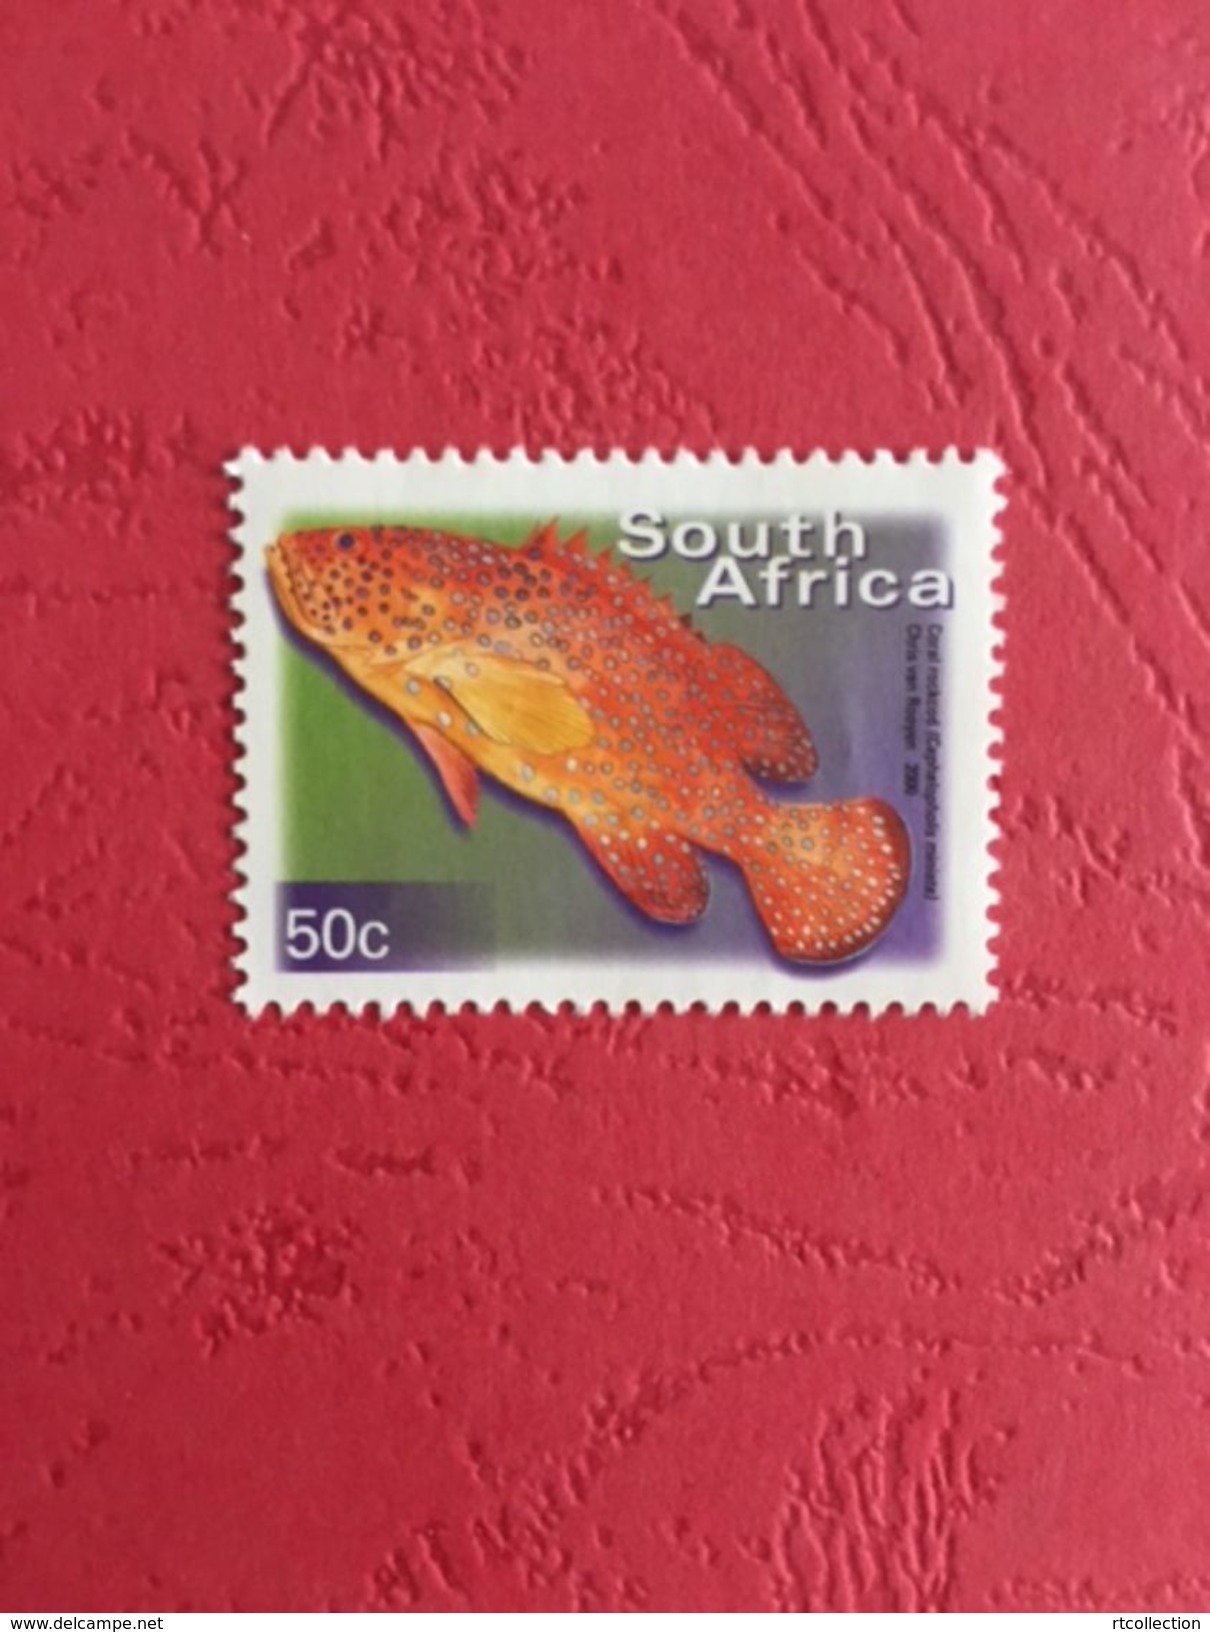 South Africa 2000 - One Coral Rockcod Fishes Fish Animals Marine Life Sealife Nature Fauna 50c Stamp MNH SG 1210 - Neufs